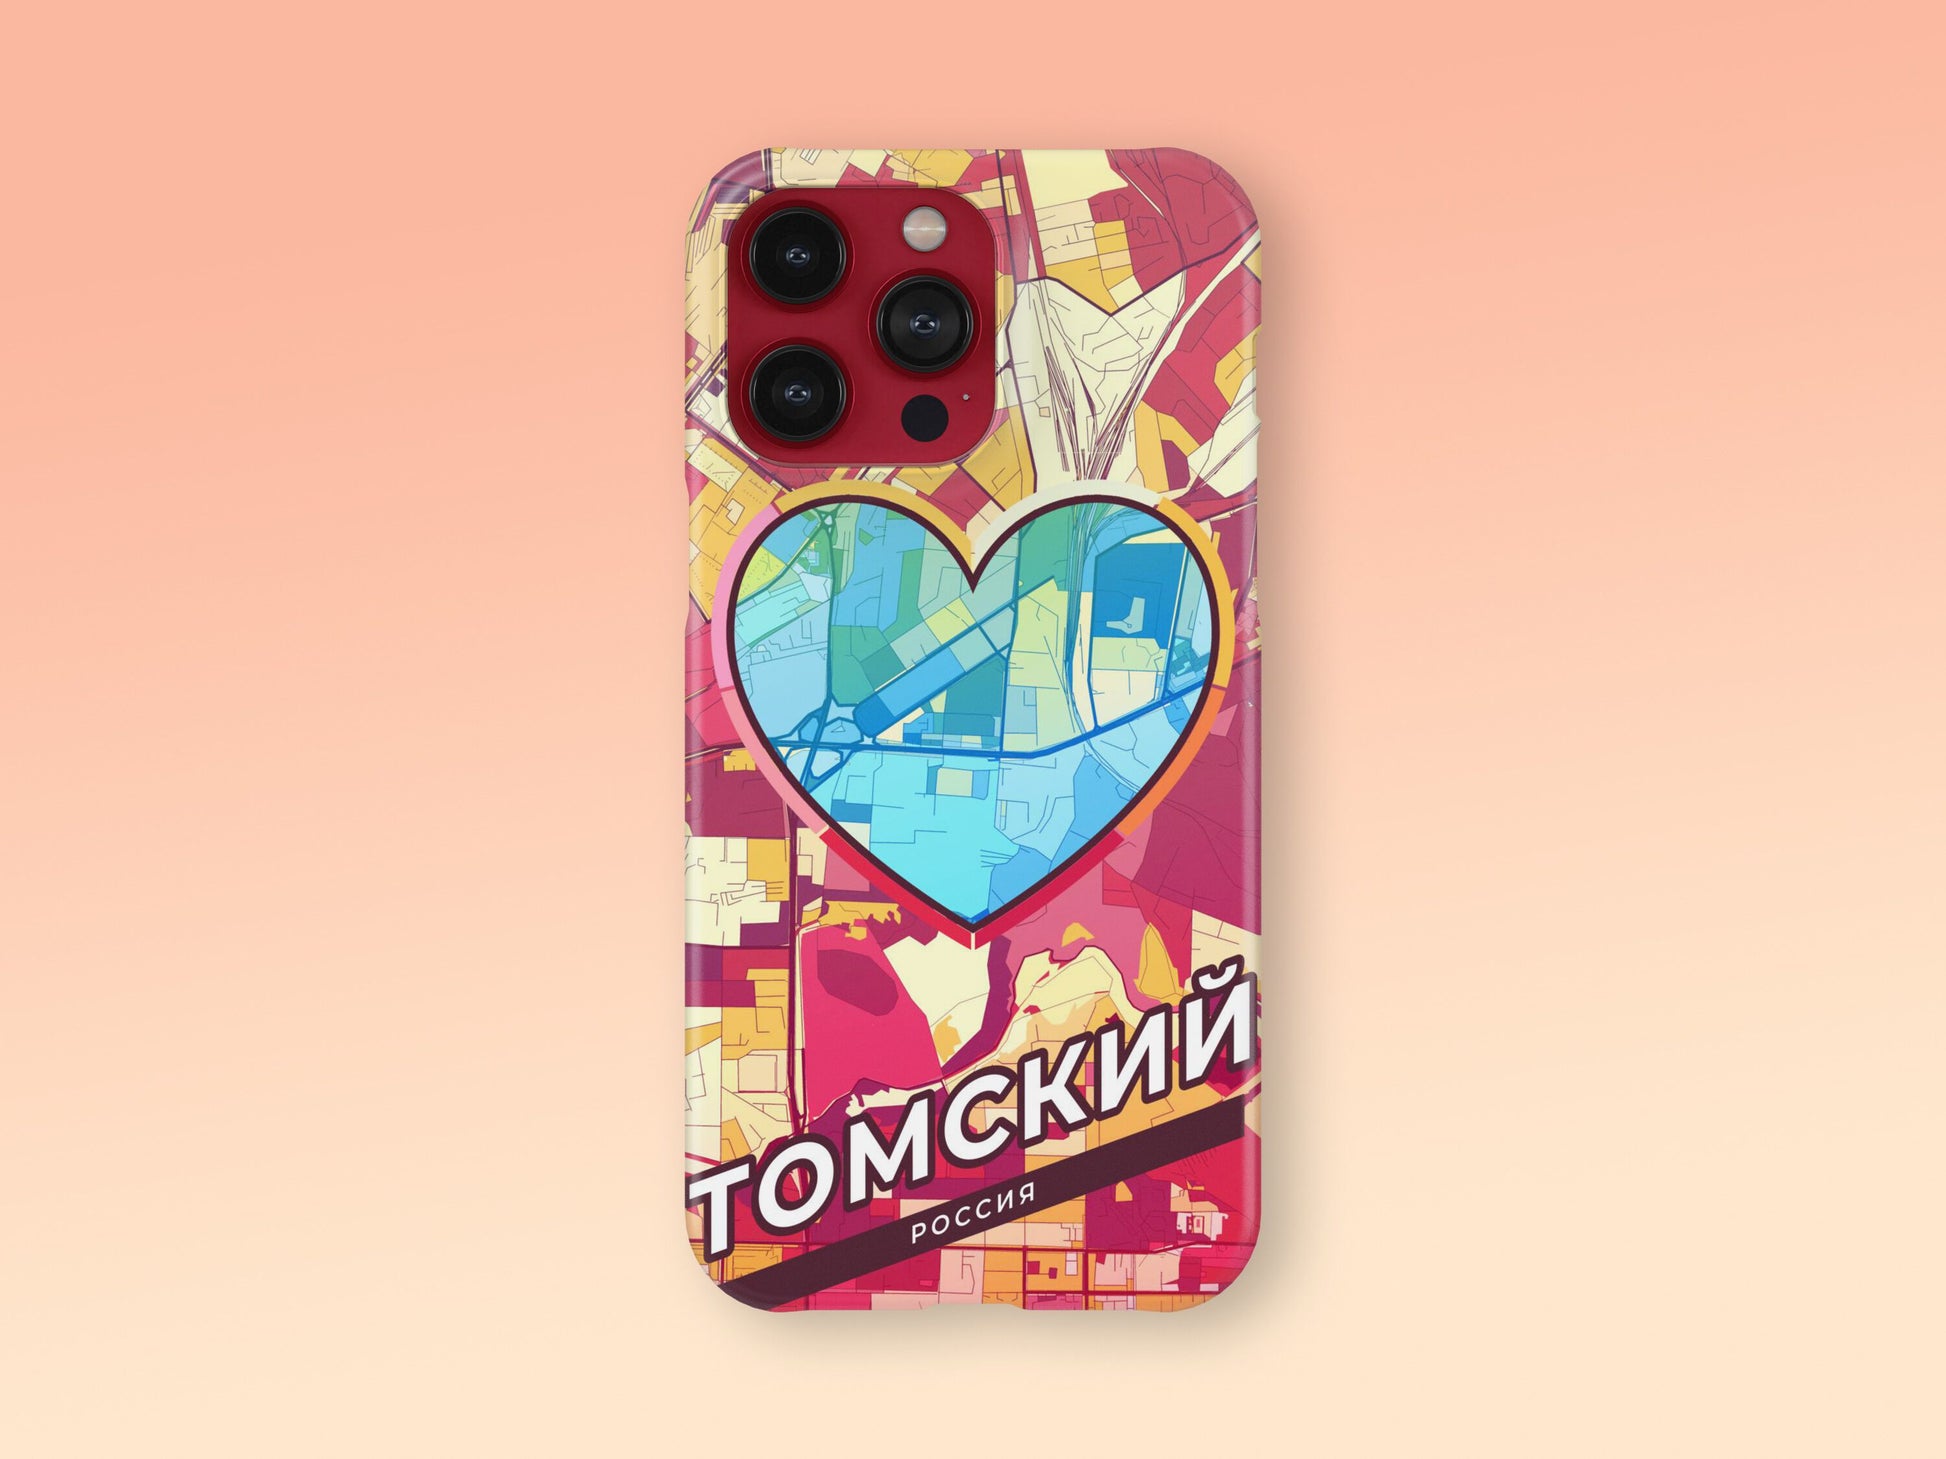 Tomsk Russia slim phone case with colorful icon 2